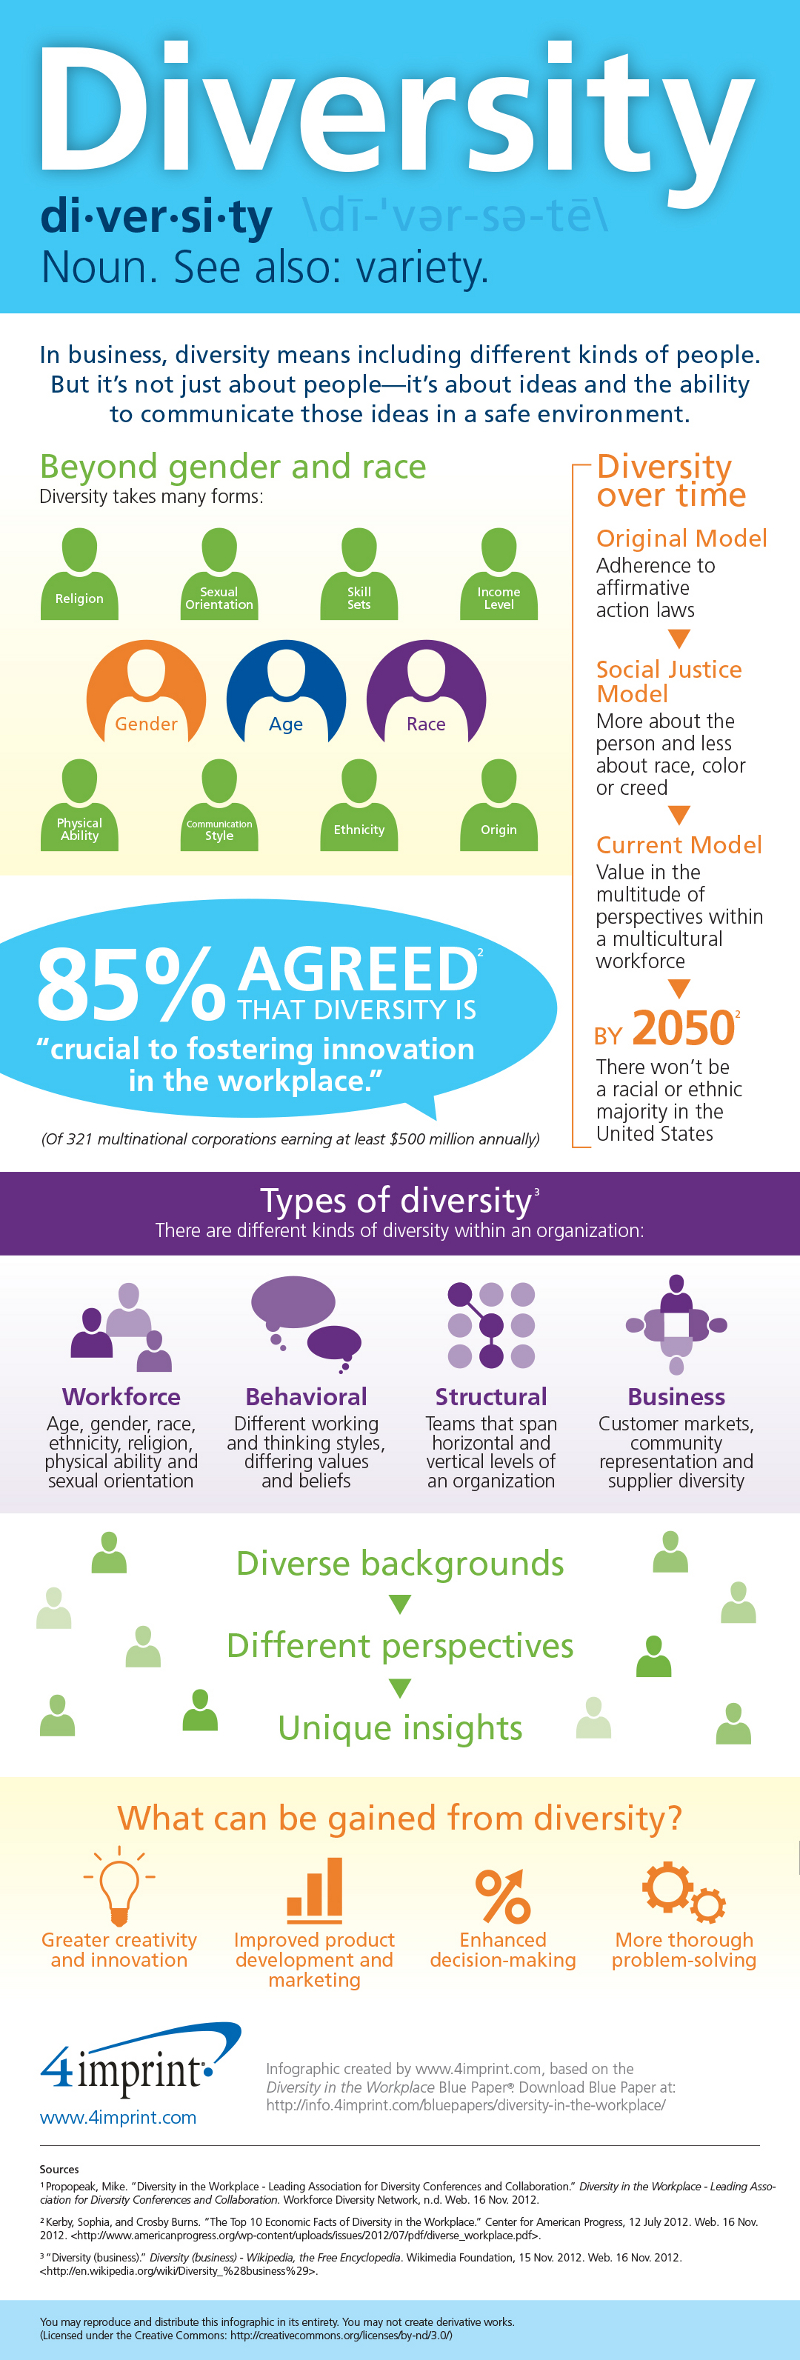 Diversity and Inclusion Infographic